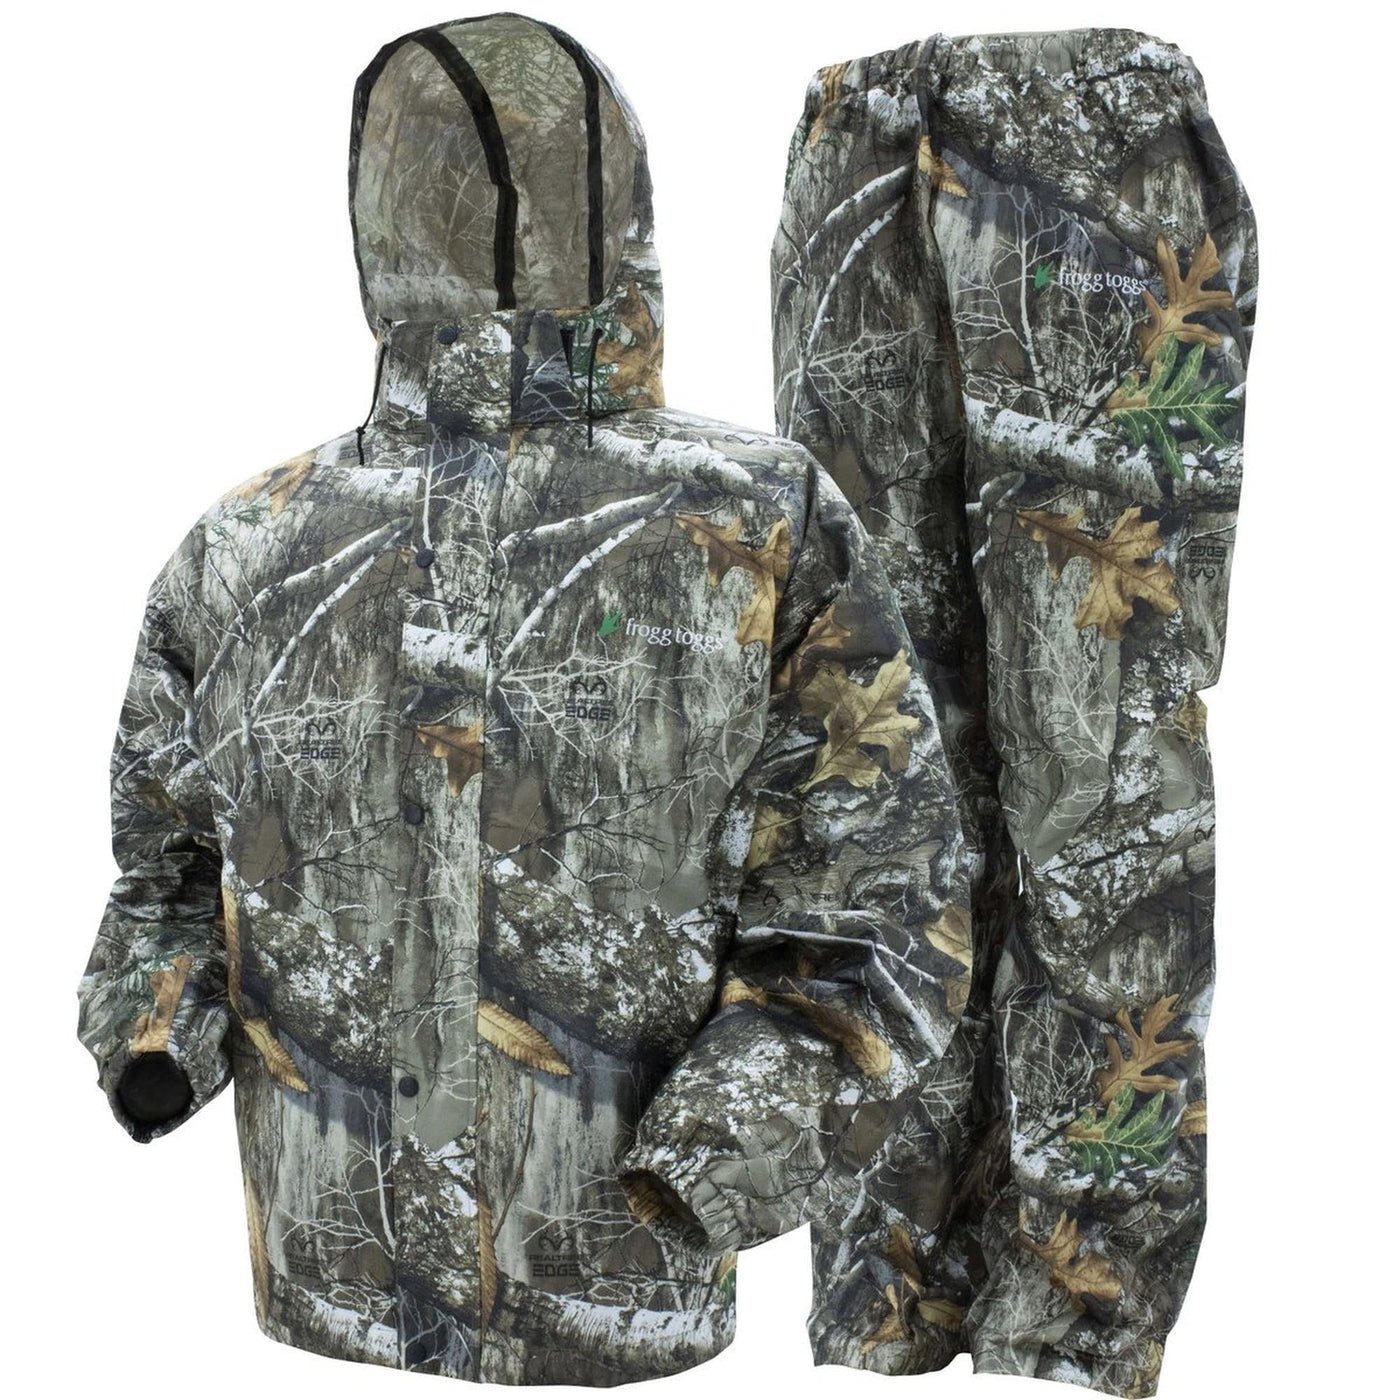 Frogg Toggs Frogg Togg Men's Classic All-Sport Rain Suit Realtree Edge / Large Clothing